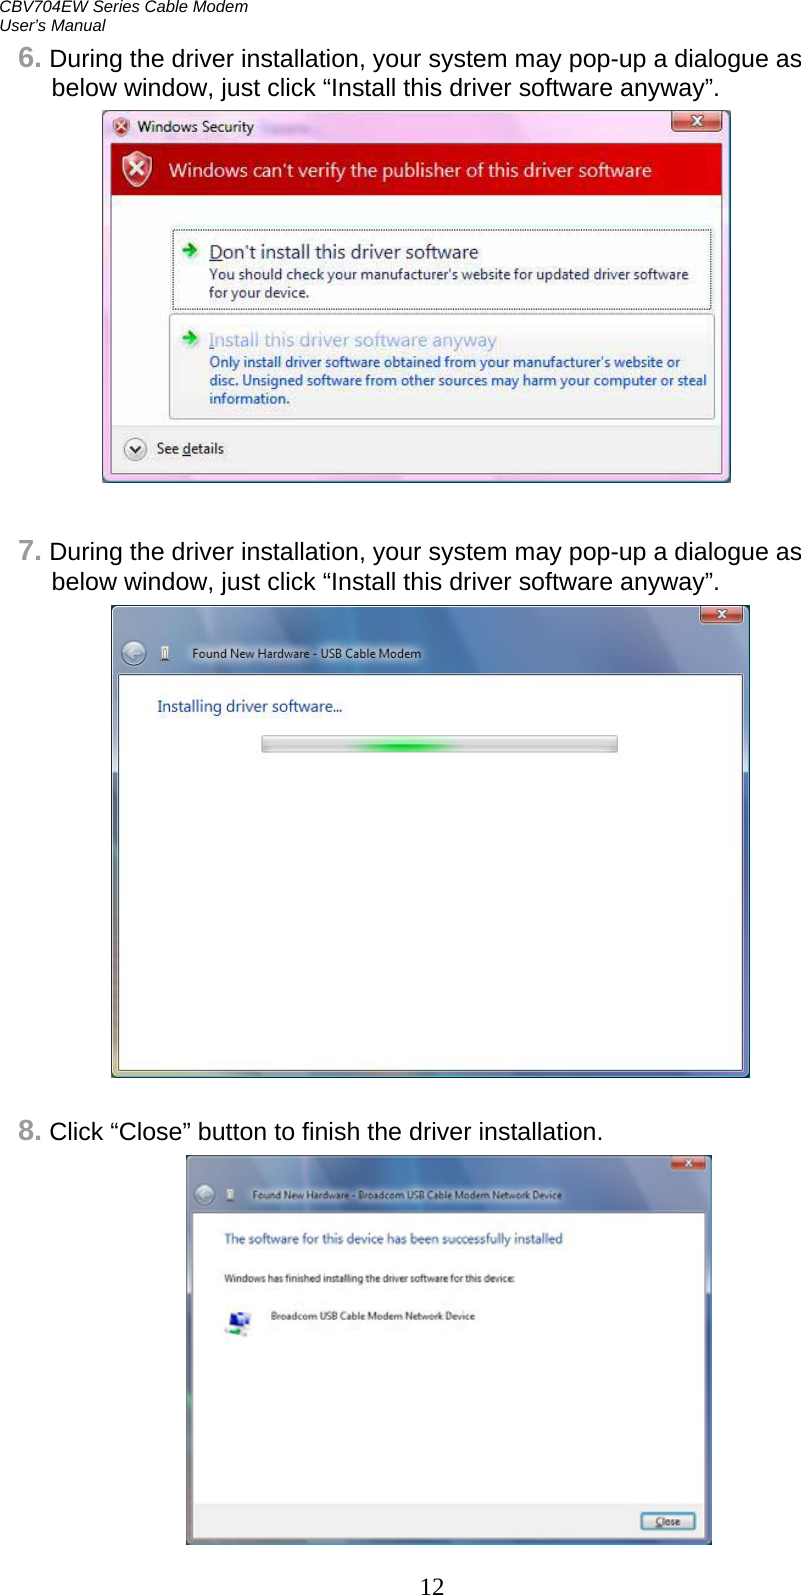 CBV704EW Series Cable Modem  User’s Manual 12 6. During the driver installation, your system may pop-up a dialogue as below window, just click “Install this driver software anyway”.                7. During the driver installation, your system may pop-up a dialogue as below window, just click “Install this driver software anyway”.                   8. Click “Close” button to finish the driver installation.     